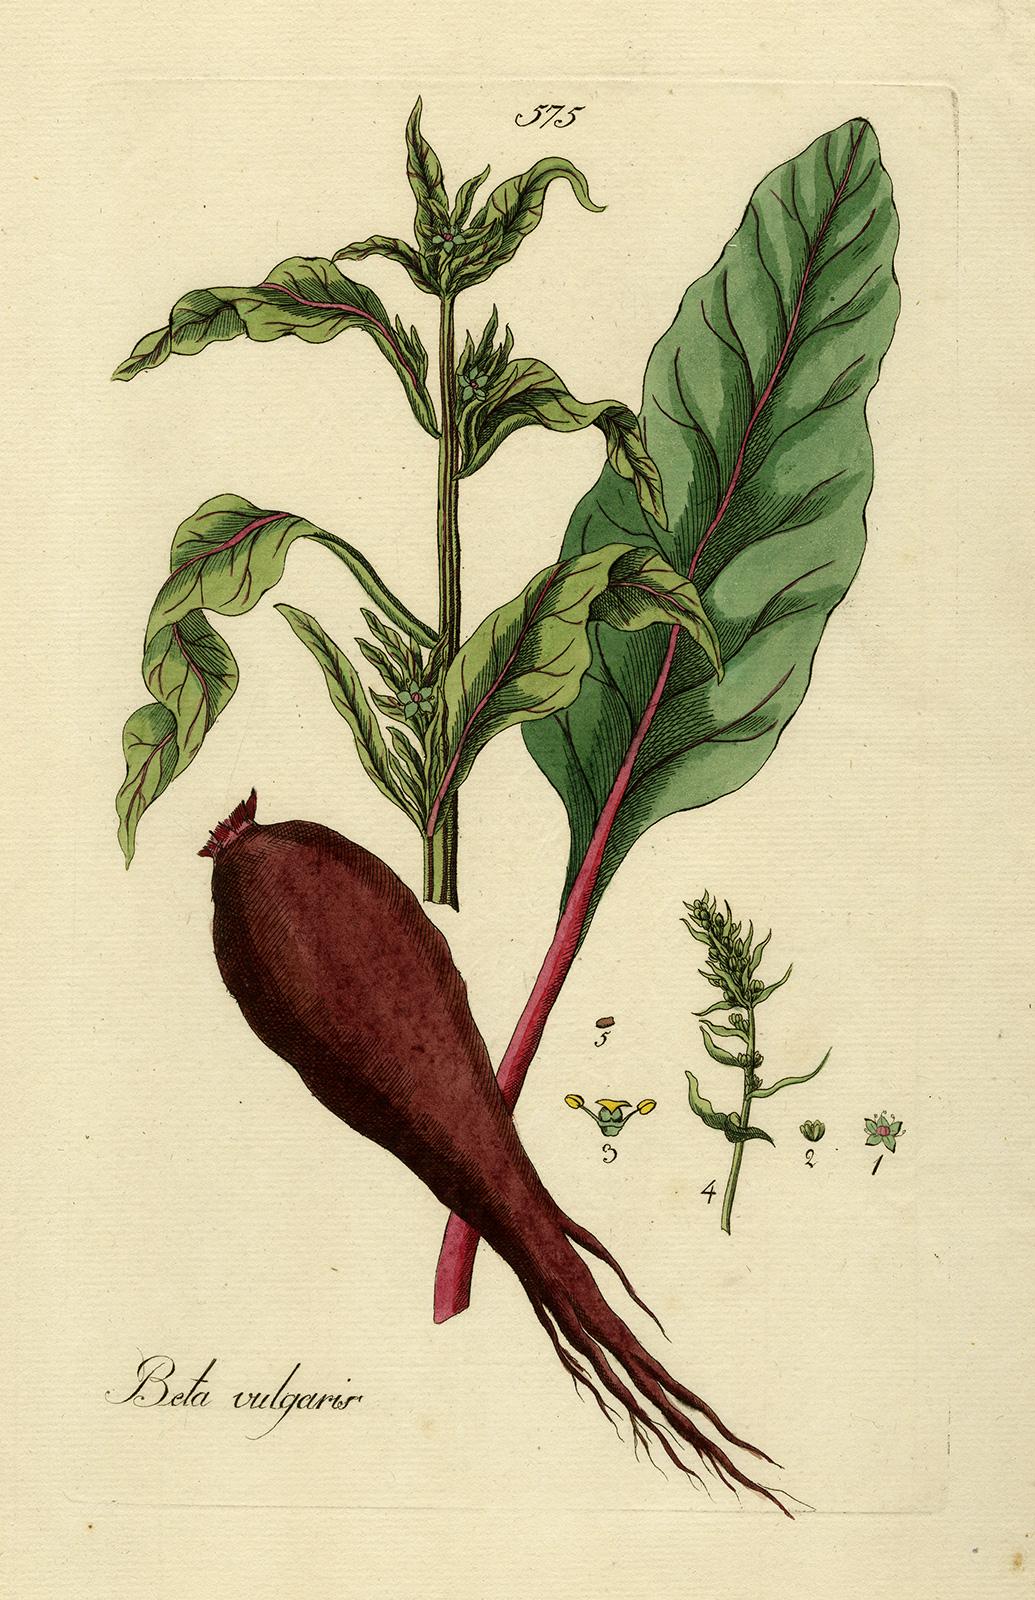 Andreas Friedrich Happe Still-Life Print - Beet from Medicinal Plants by Happe - Handcoloured engraving - 18th century